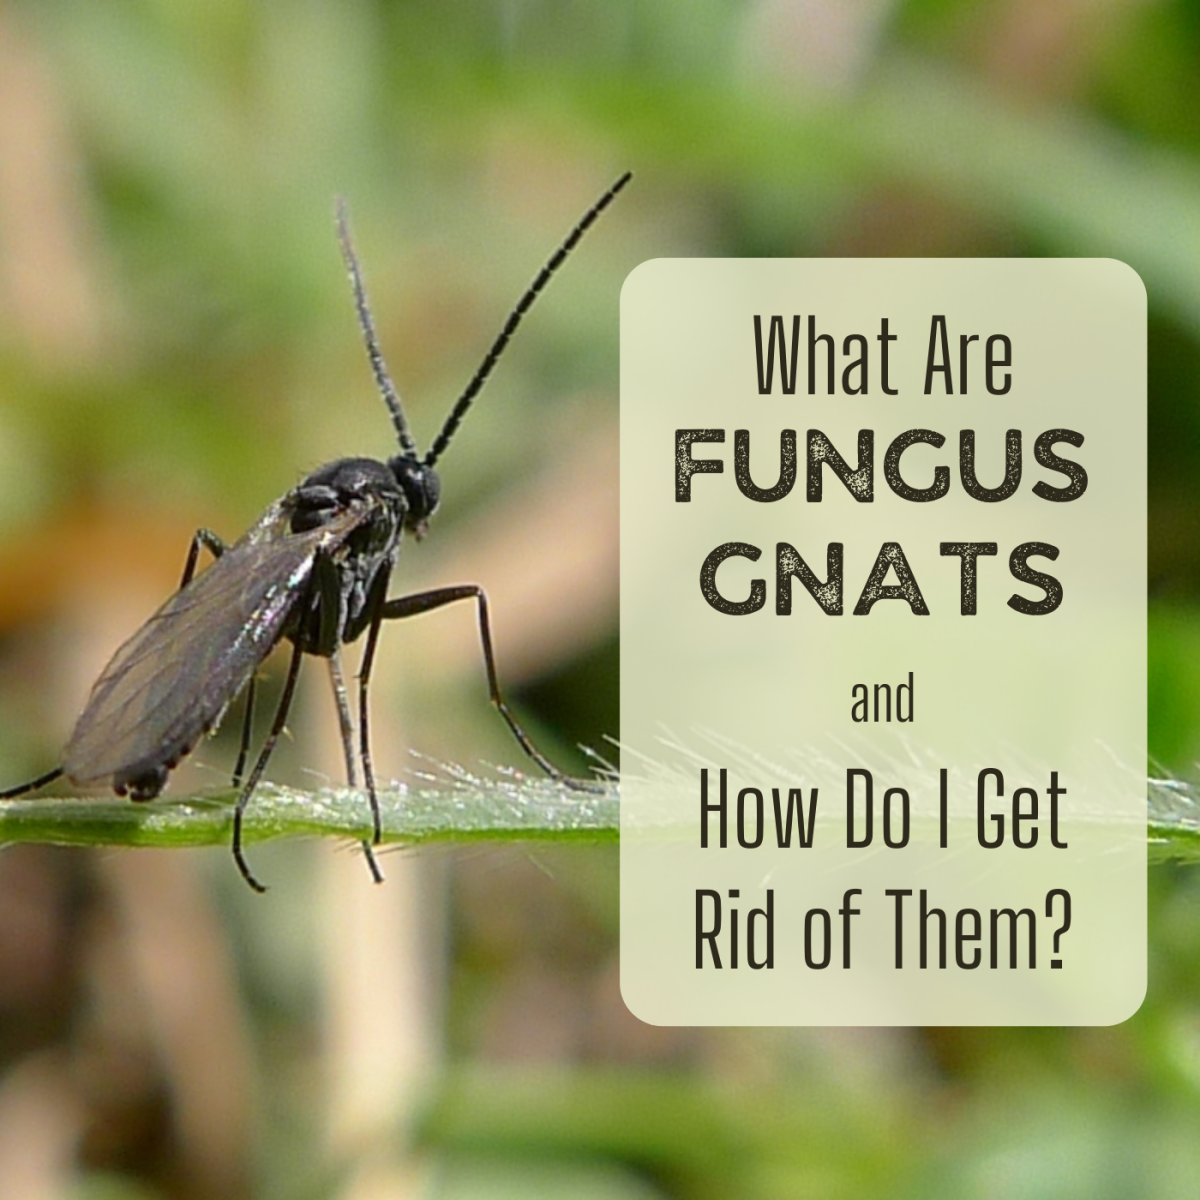 Fungus Gnats: Where Do These Little Flying Bugs Come From?